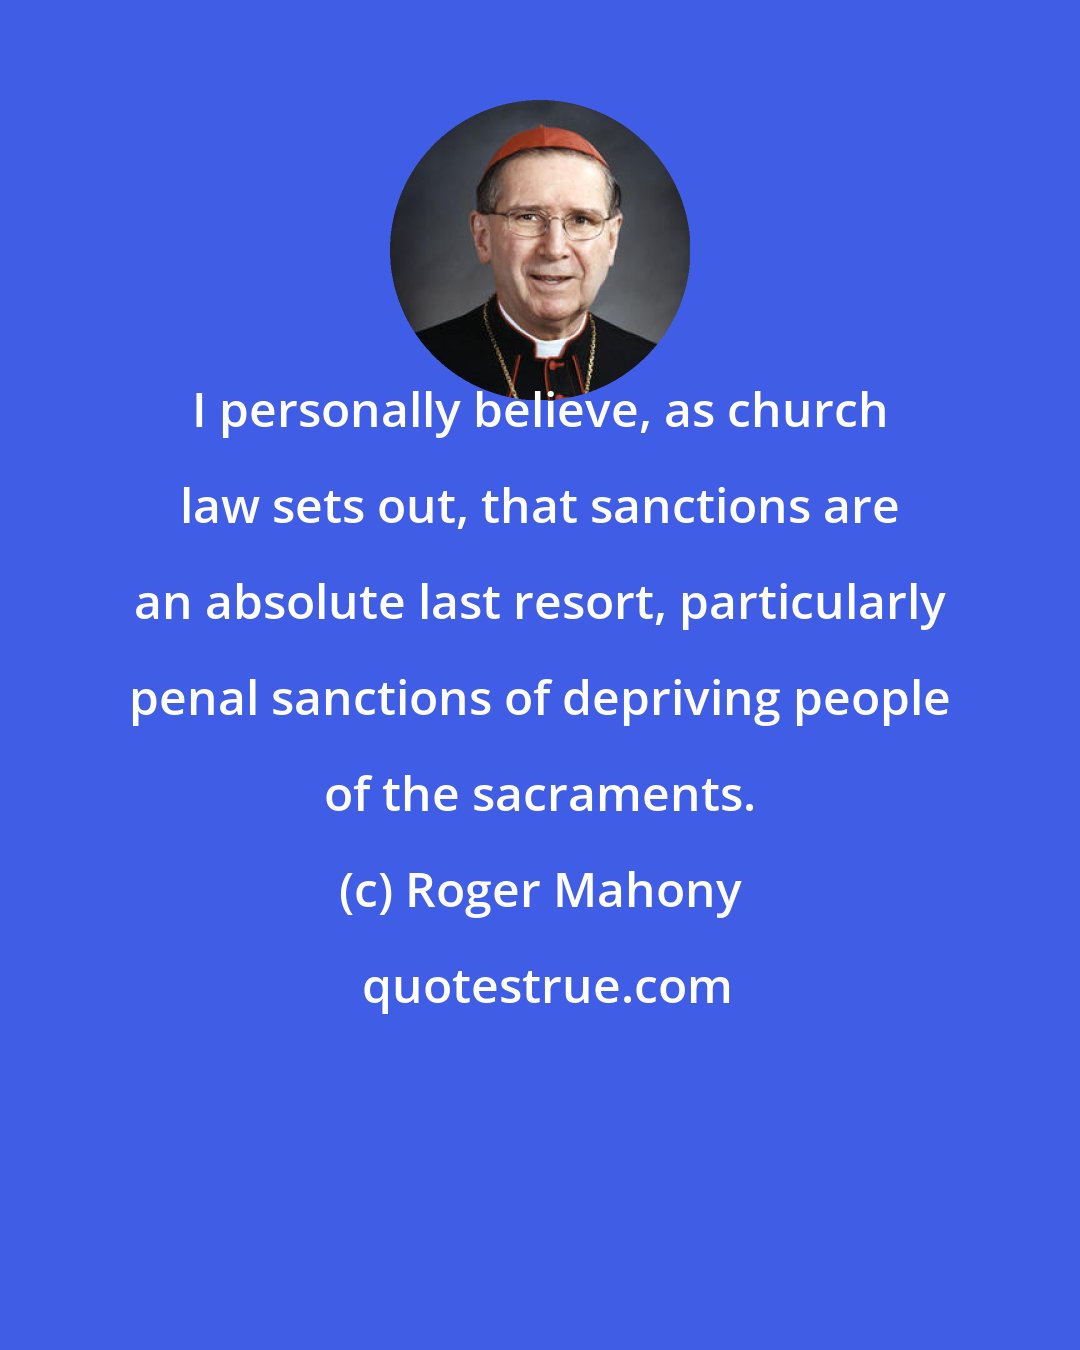 Roger Mahony: I personally believe, as church law sets out, that sanctions are an absolute last resort, particularly penal sanctions of depriving people of the sacraments.